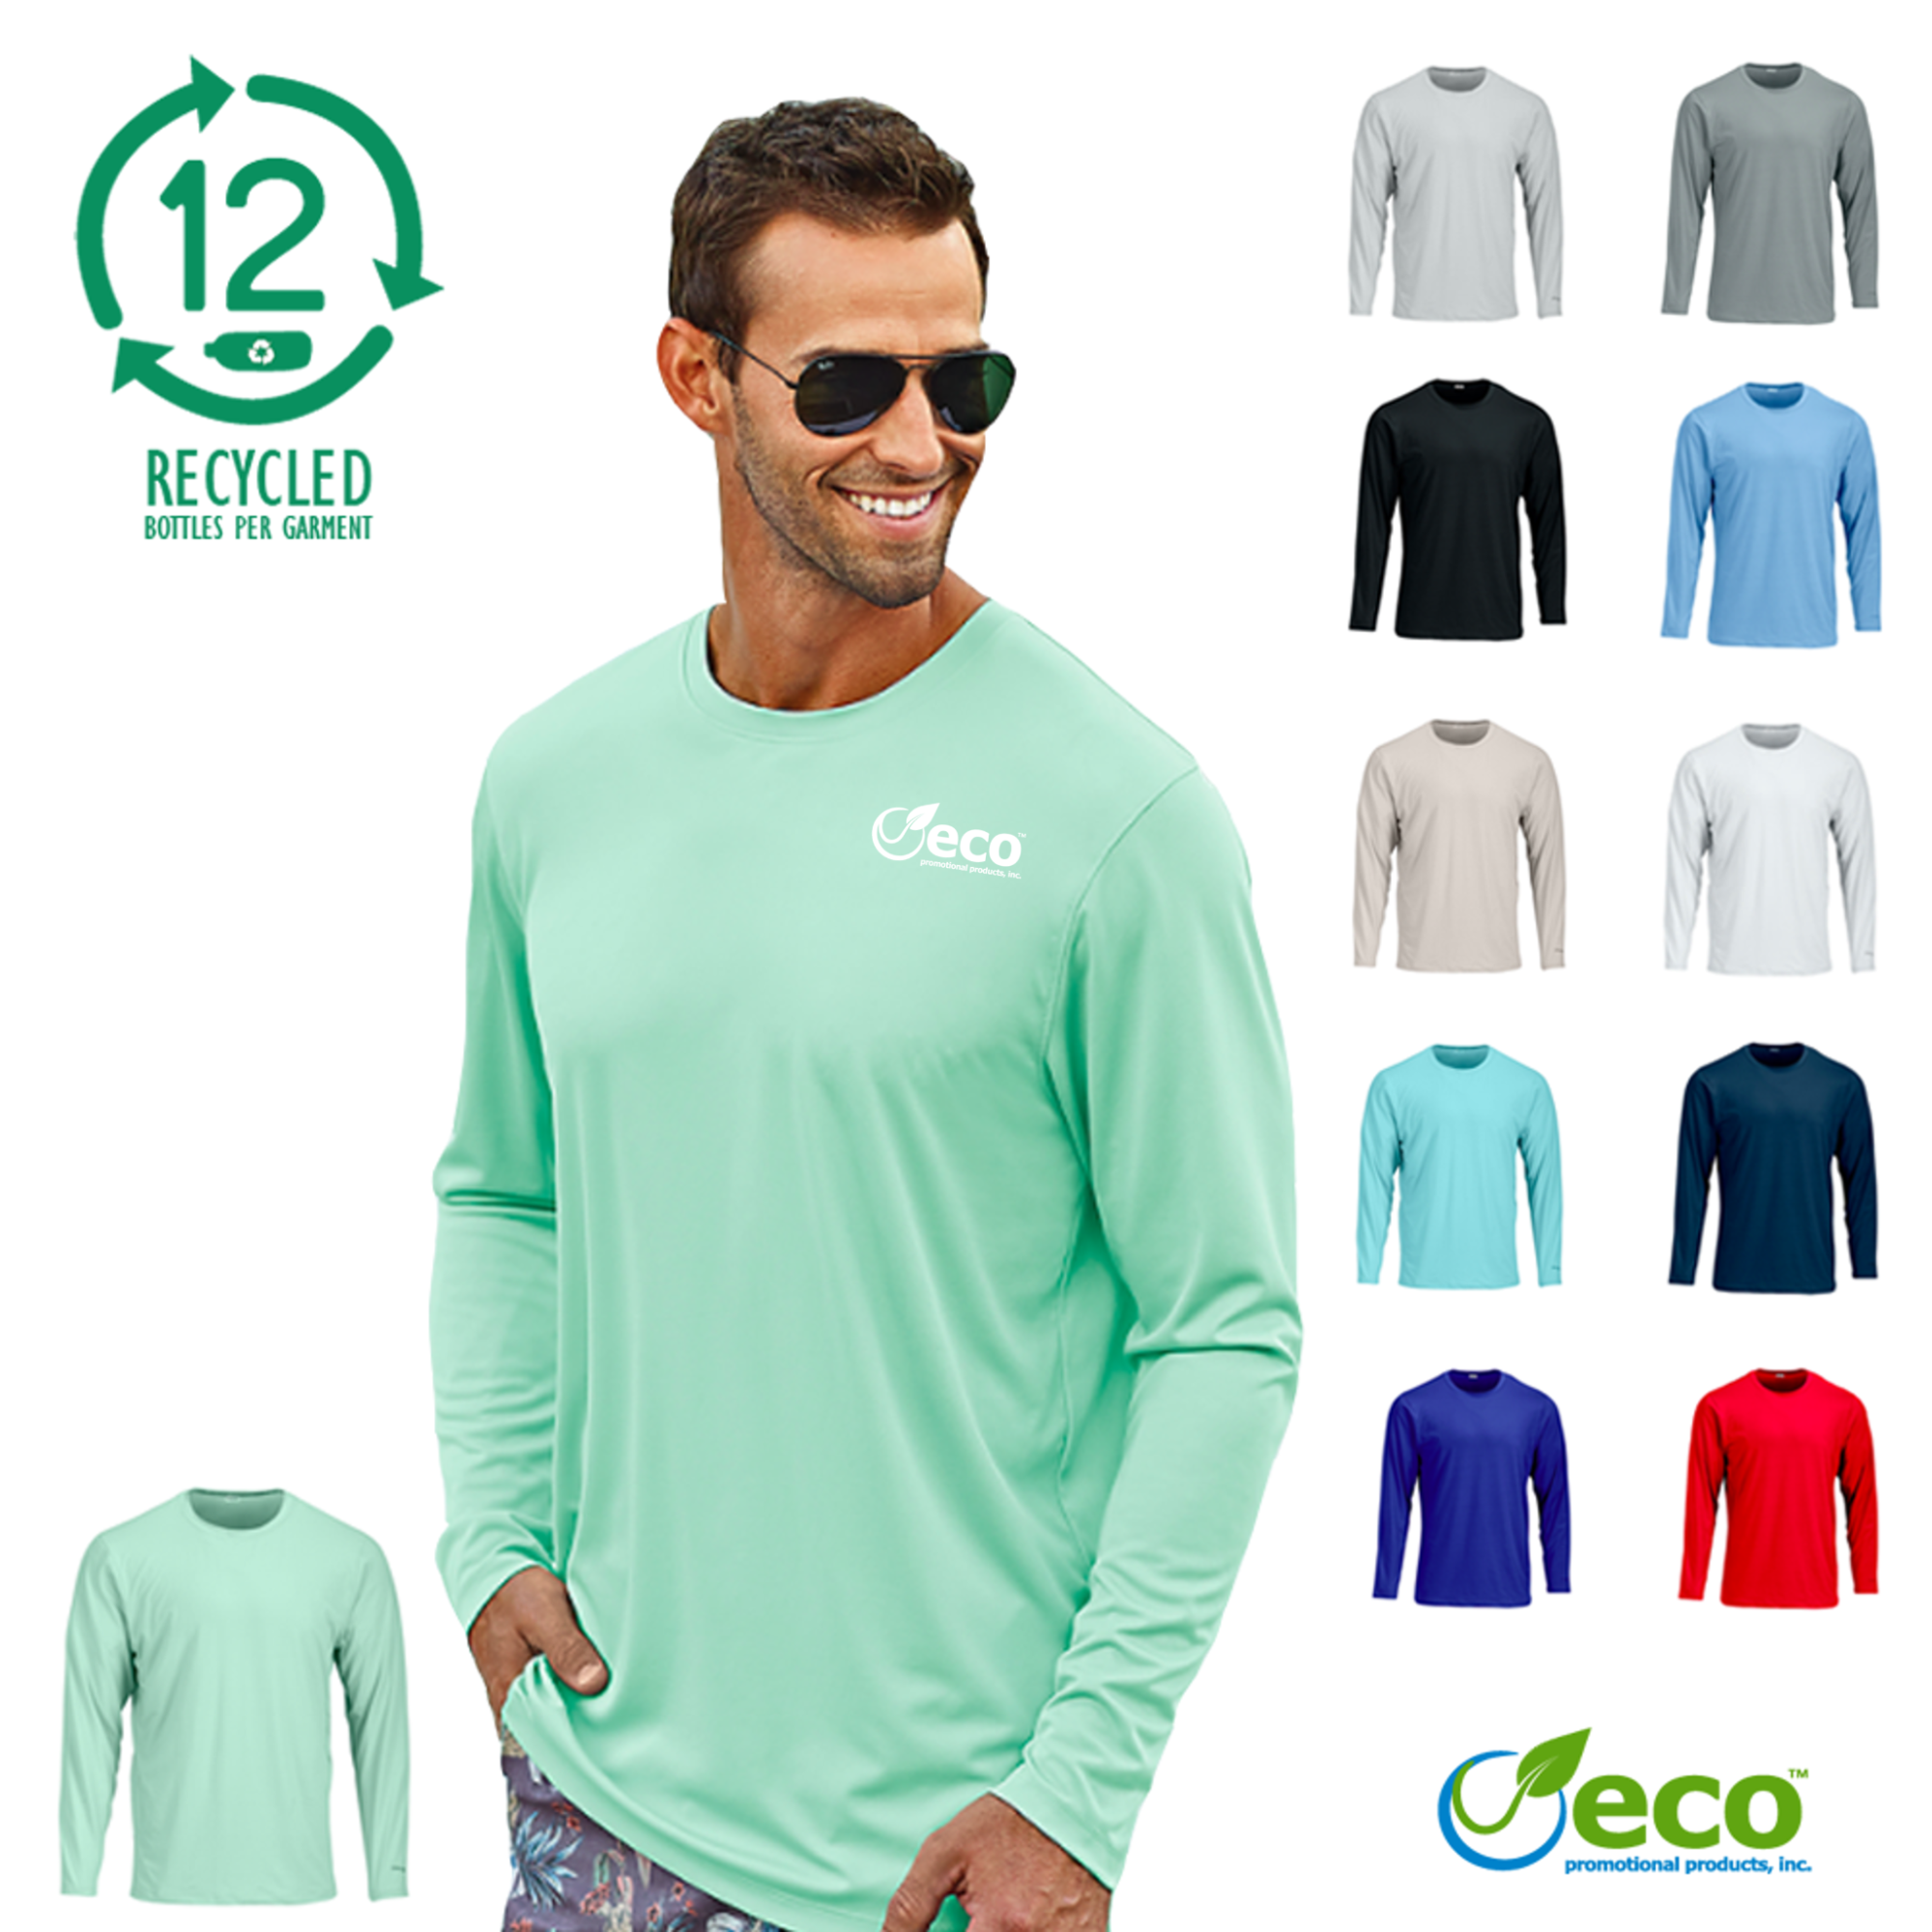 male model wearing recycled long sleeve t-shirt in mint color